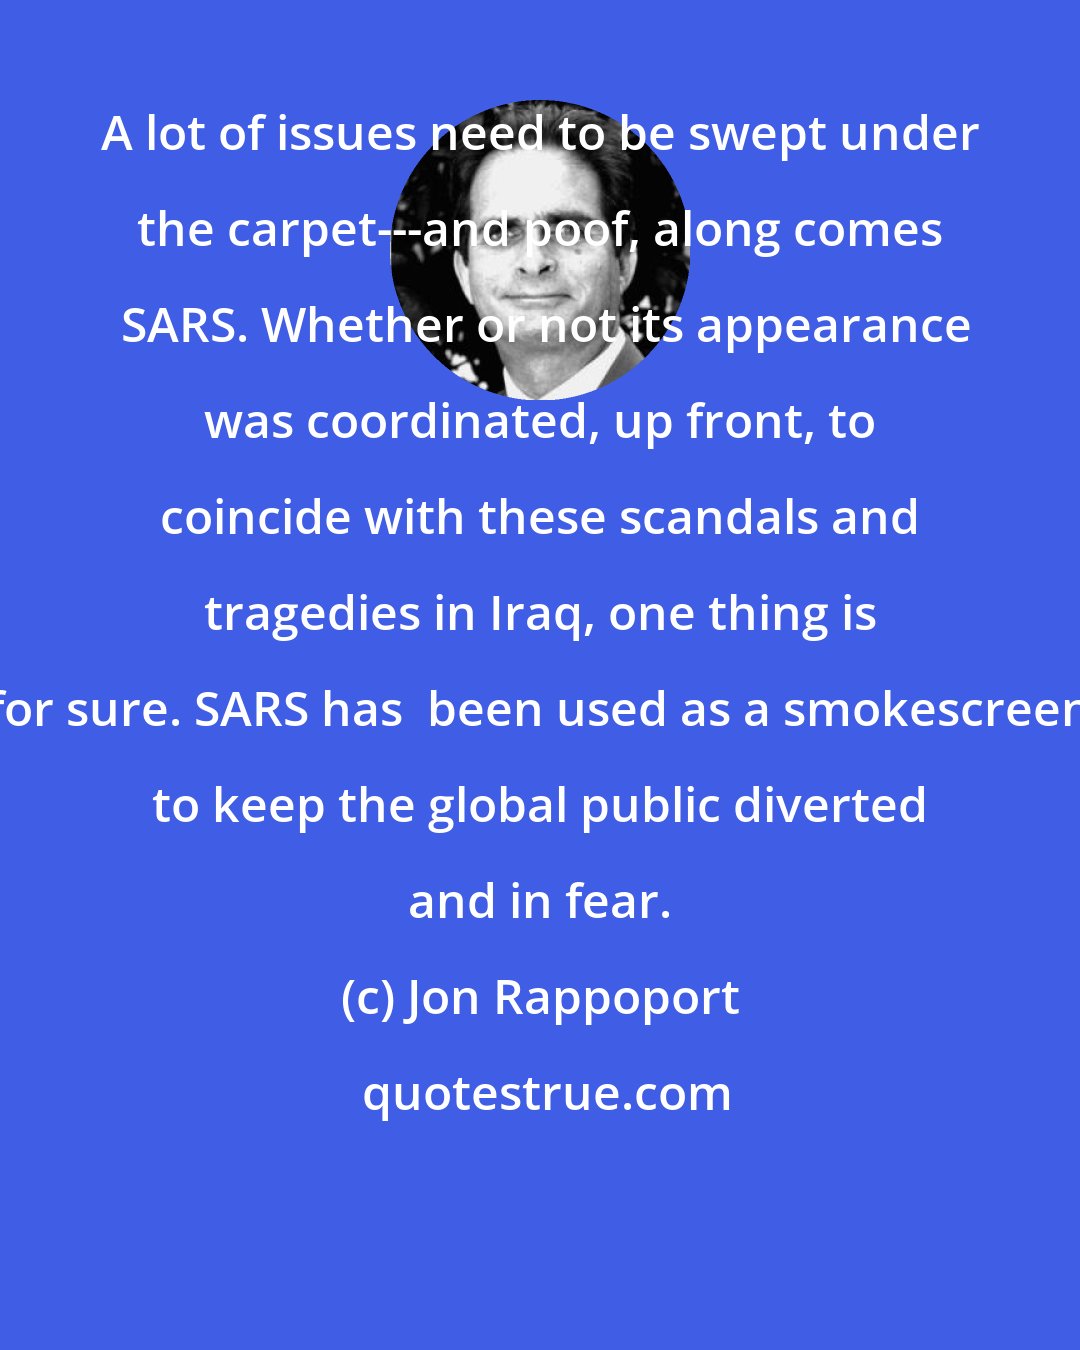 Jon Rappoport: A lot of issues need to be swept under the carpet---and poof, along comes  SARS. Whether or not its appearance was coordinated, up front, to coincide with these scandals and tragedies in Iraq, one thing is for sure. SARS has  been used as a smokescreen to keep the global public diverted and in fear.